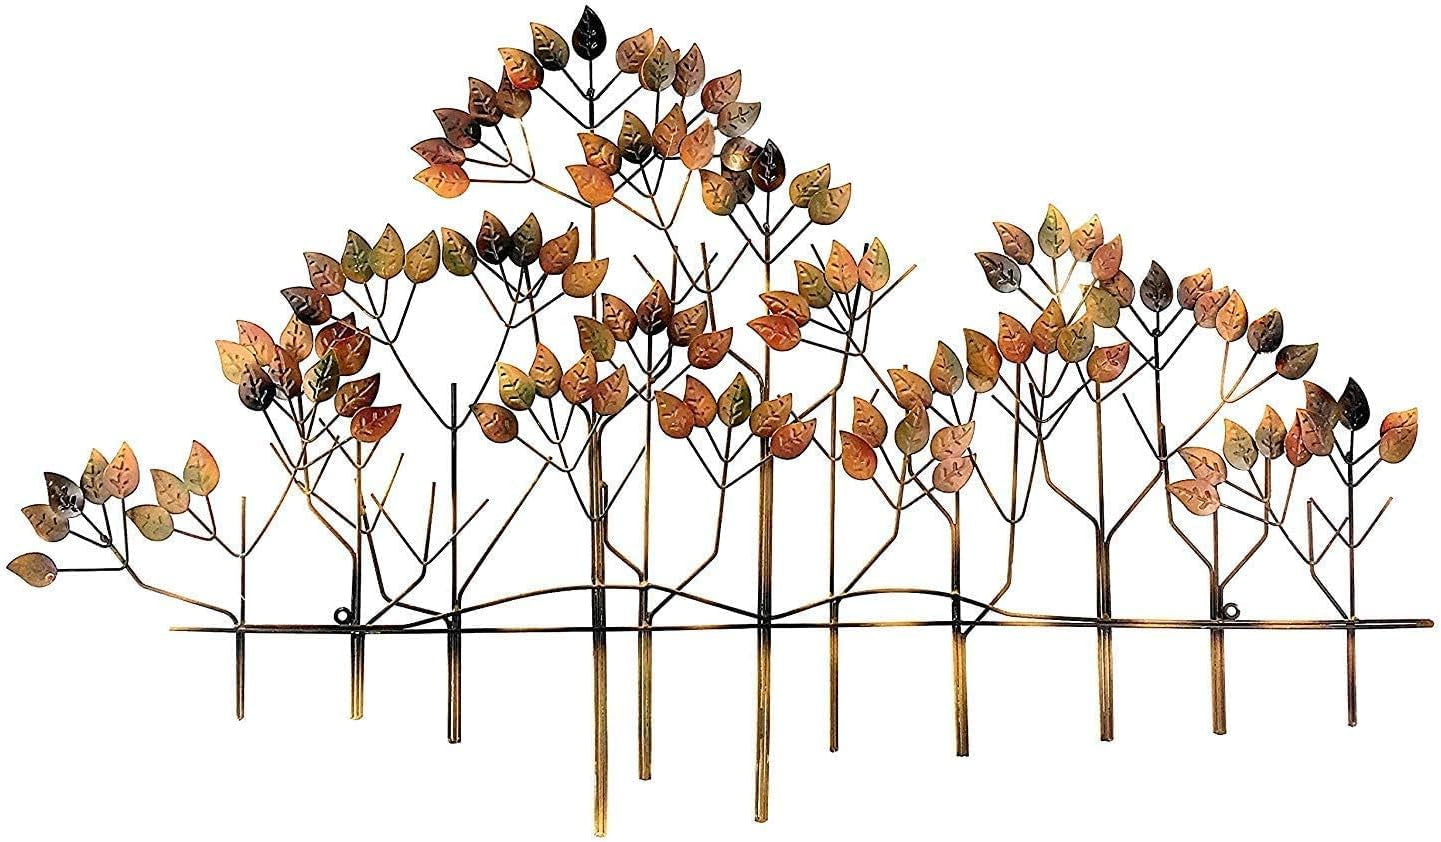 Metal Tree Wall Decor Home Accents Wrought Iron 3D Sculpture Leaf Floral Plaque Hanging Country Cottage Art Scroll Garden Sculptures 40 Inch